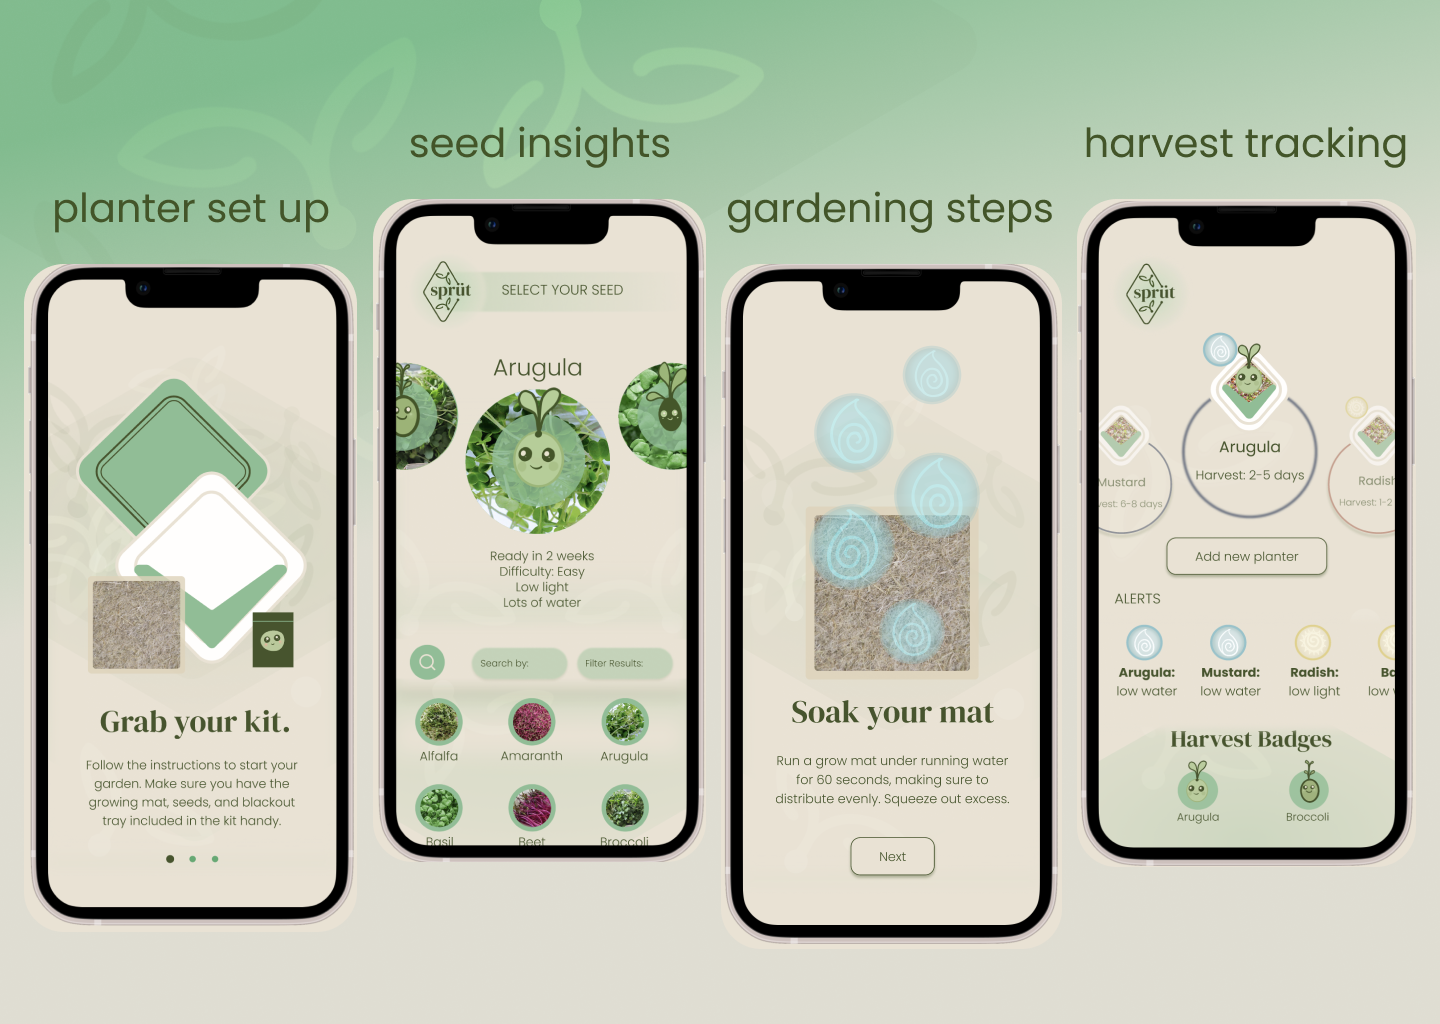 Screens from Sprüt companion garden app showing the features that include planter set up,. seed insights, gardening steps, and harvest tracking. 